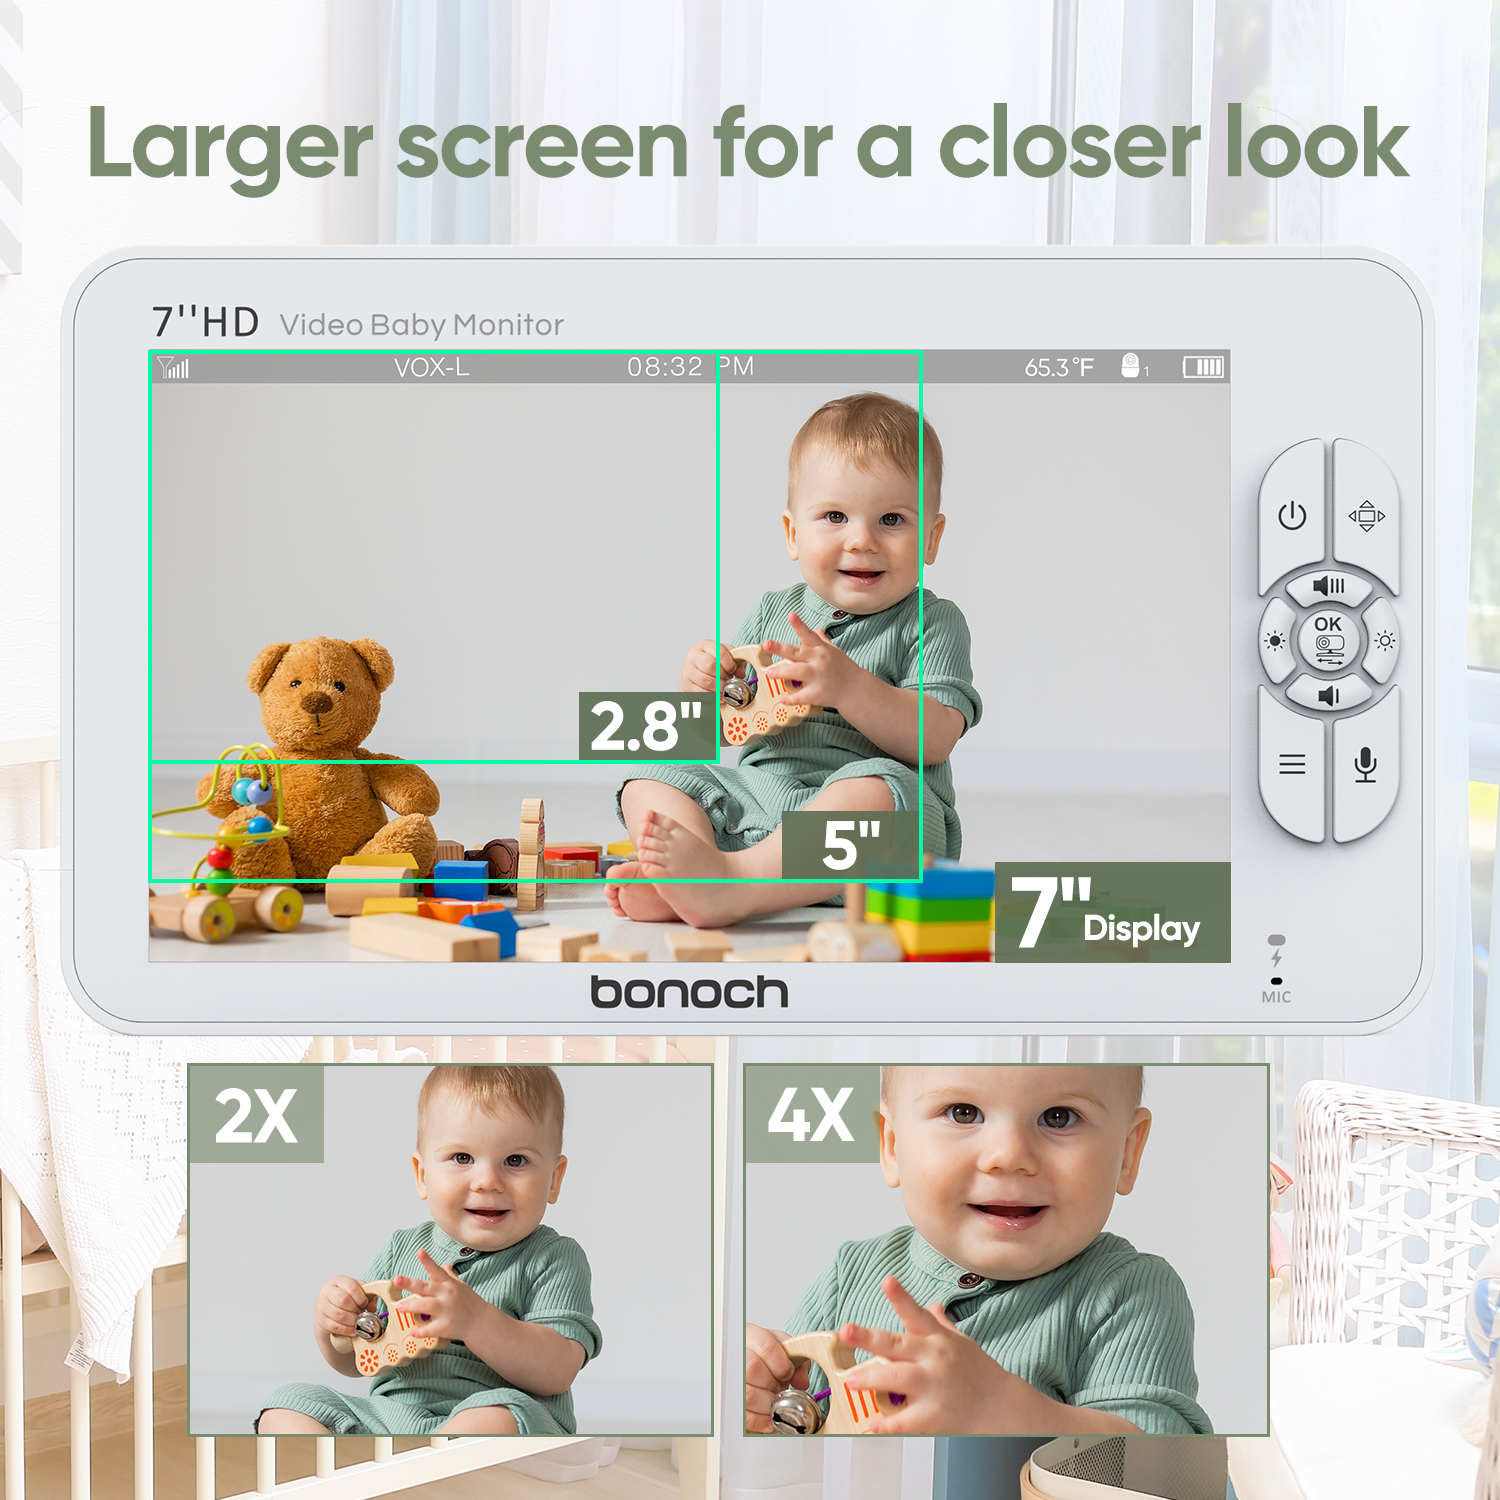 bonoch MegaView Baby Monitor with 2 Cameras 7" 720P HD LCD Split Screen Video Audio No WiFi Auto Night Vision - image 5 of 7